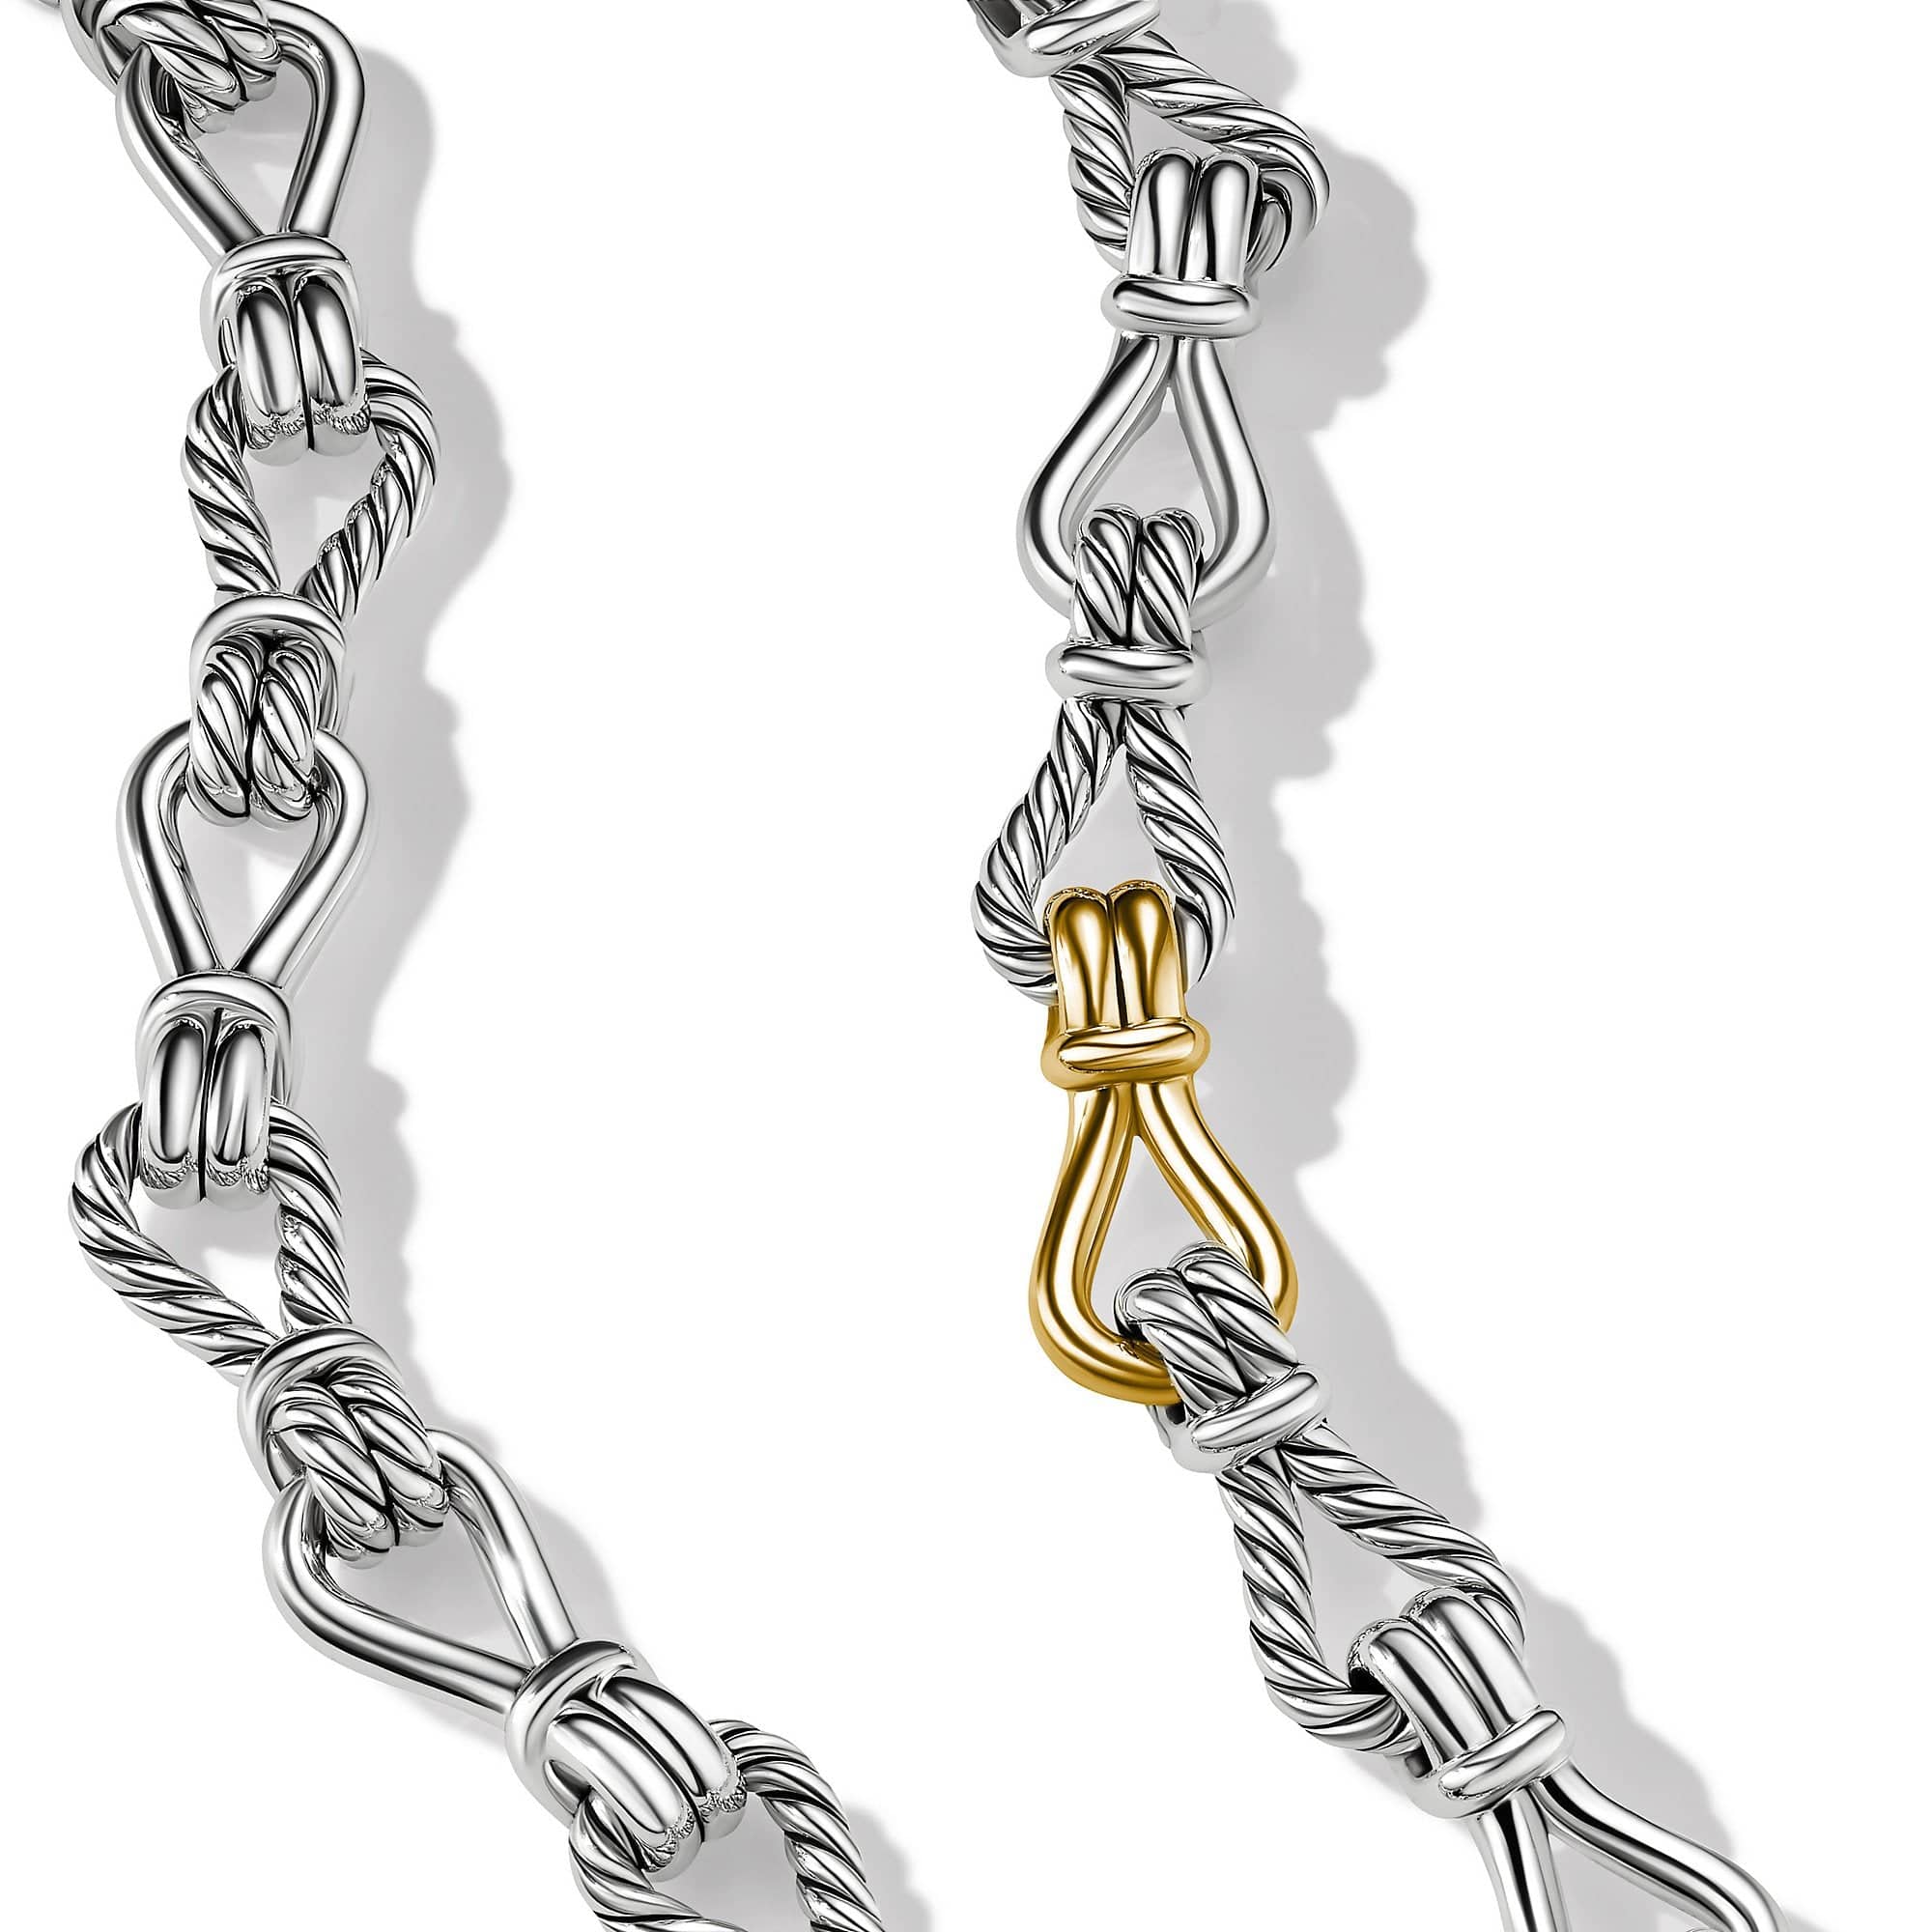 Thoroughbred Loop Chain Link Sterling Silver Necklace with 18K Yellow Gold